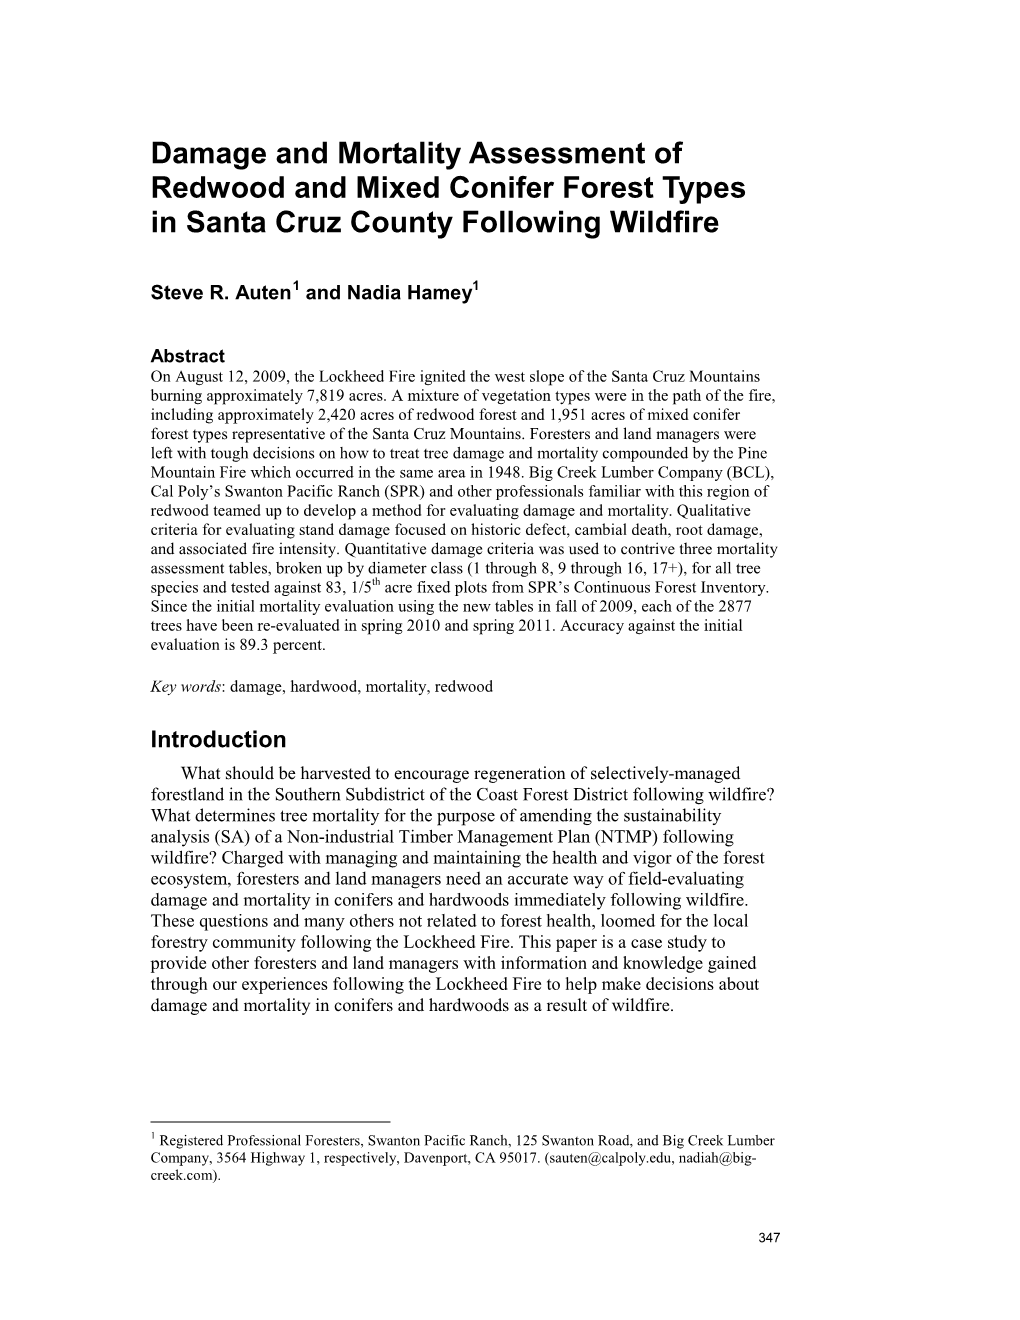 Damage and Mortality Assessment of Redwood and Mixed Conifer Forest Types in Santa Cruz County Following Wildfire